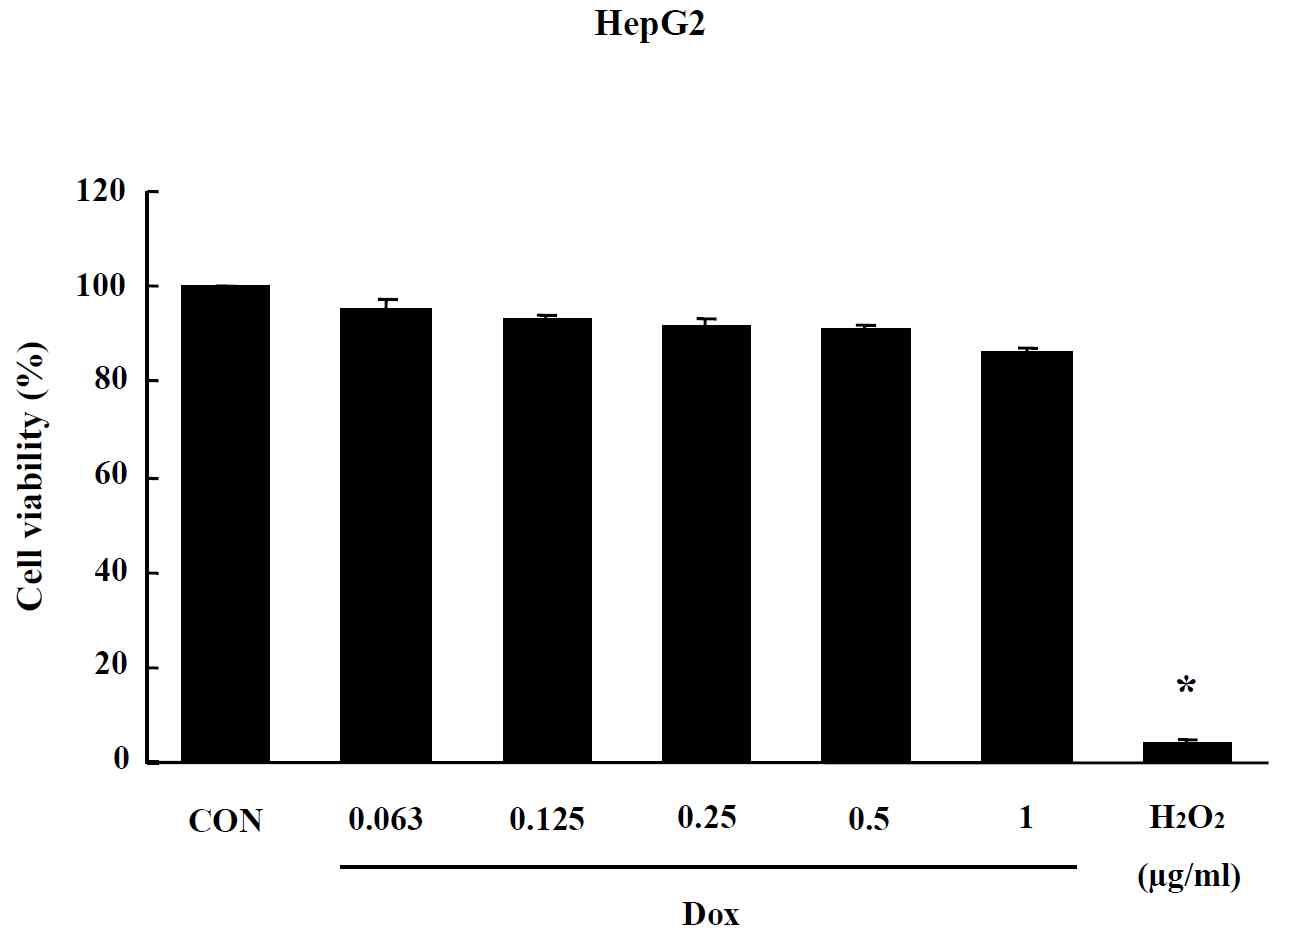 Effects of Liposome on MTT assay in HepG2 cells. Cells were treated with drug for 24 hr. Data are shown as means ± SE (n = 5). * p<0.05, significantly different from the control.